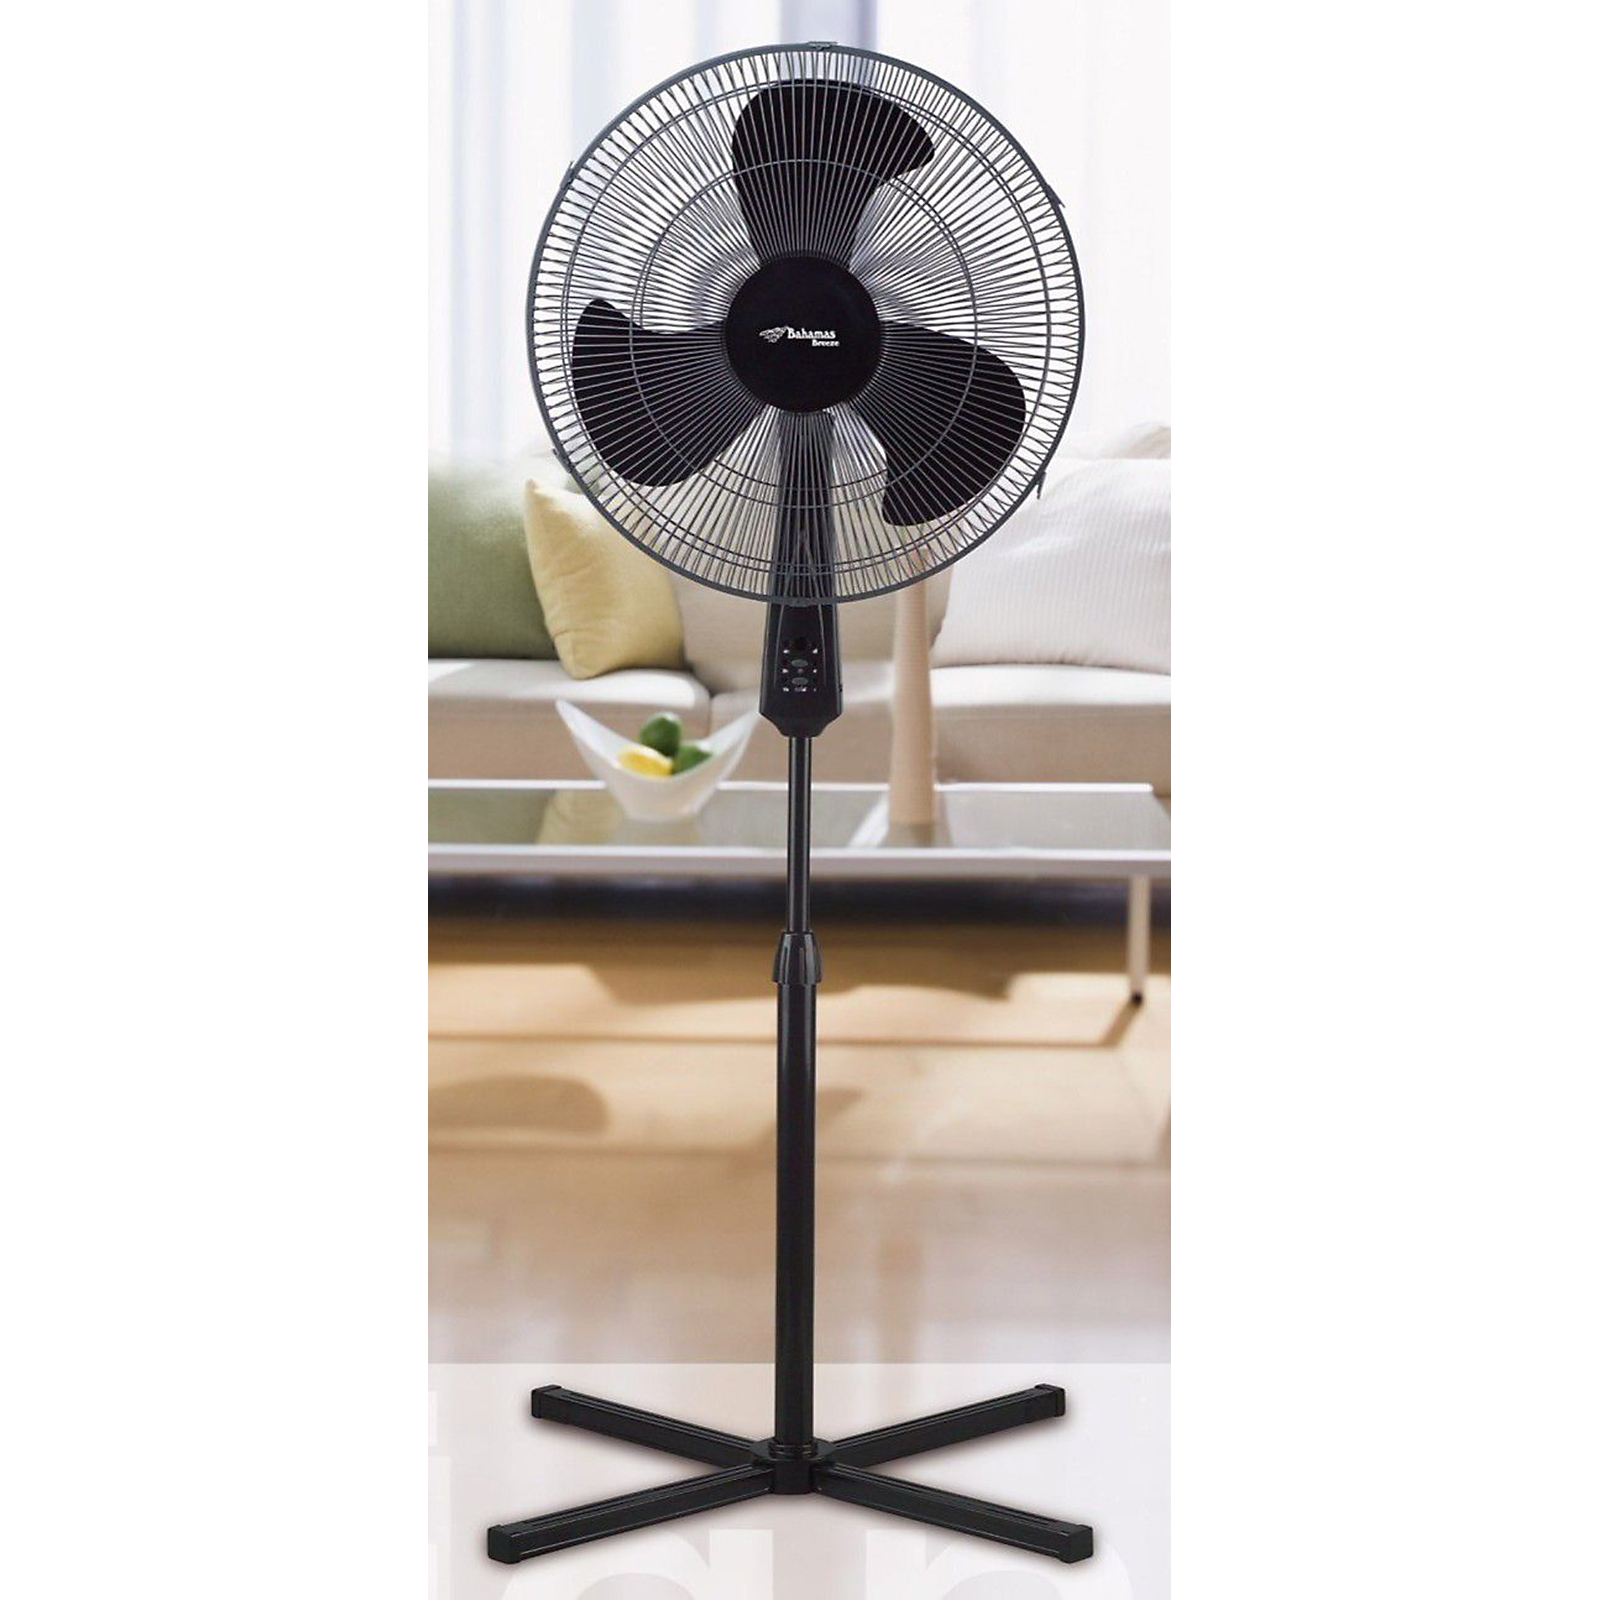 Bahama FS45-3ER 18" Stand Fan with Remote Control - Black